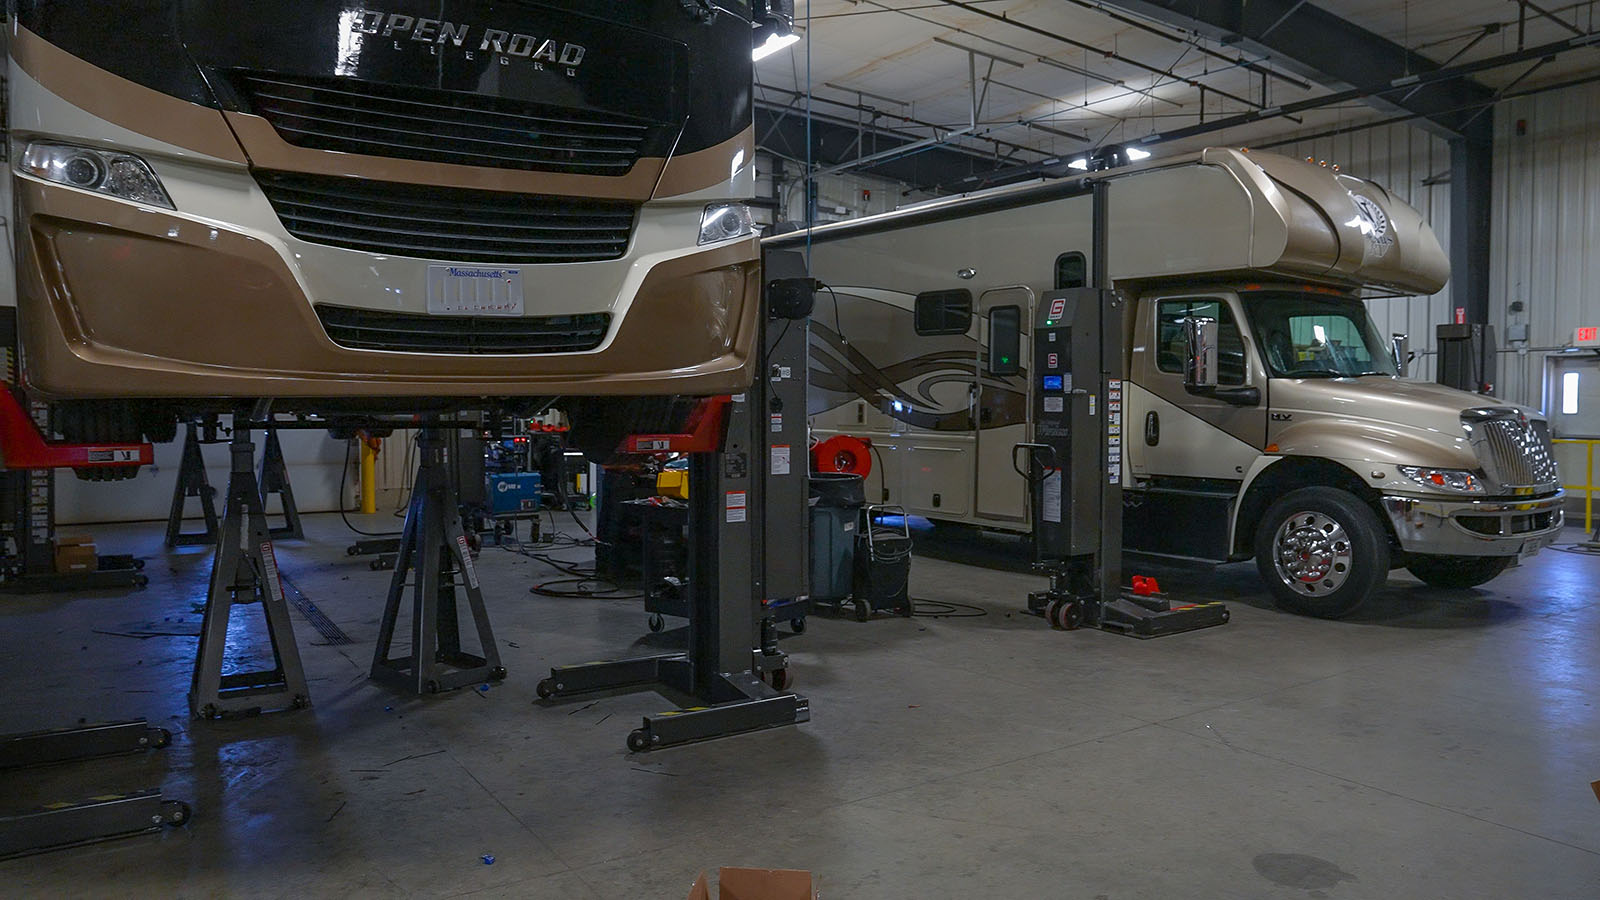 A Guide to Installing a LiquidSpring System on Your RV